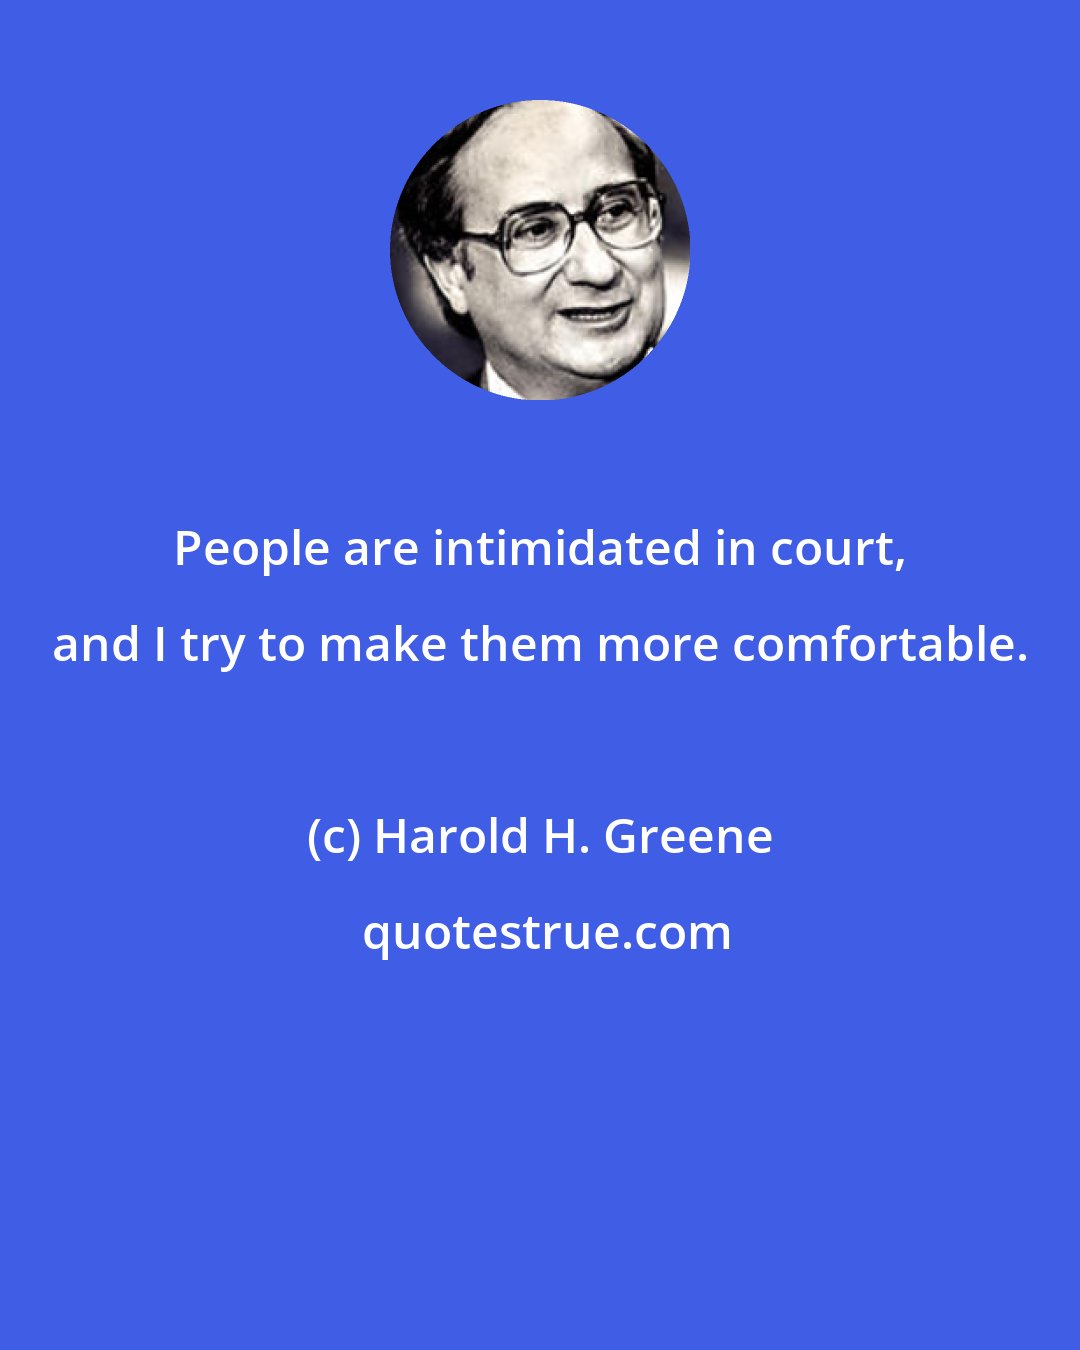 Harold H. Greene: People are intimidated in court, and I try to make them more comfortable.